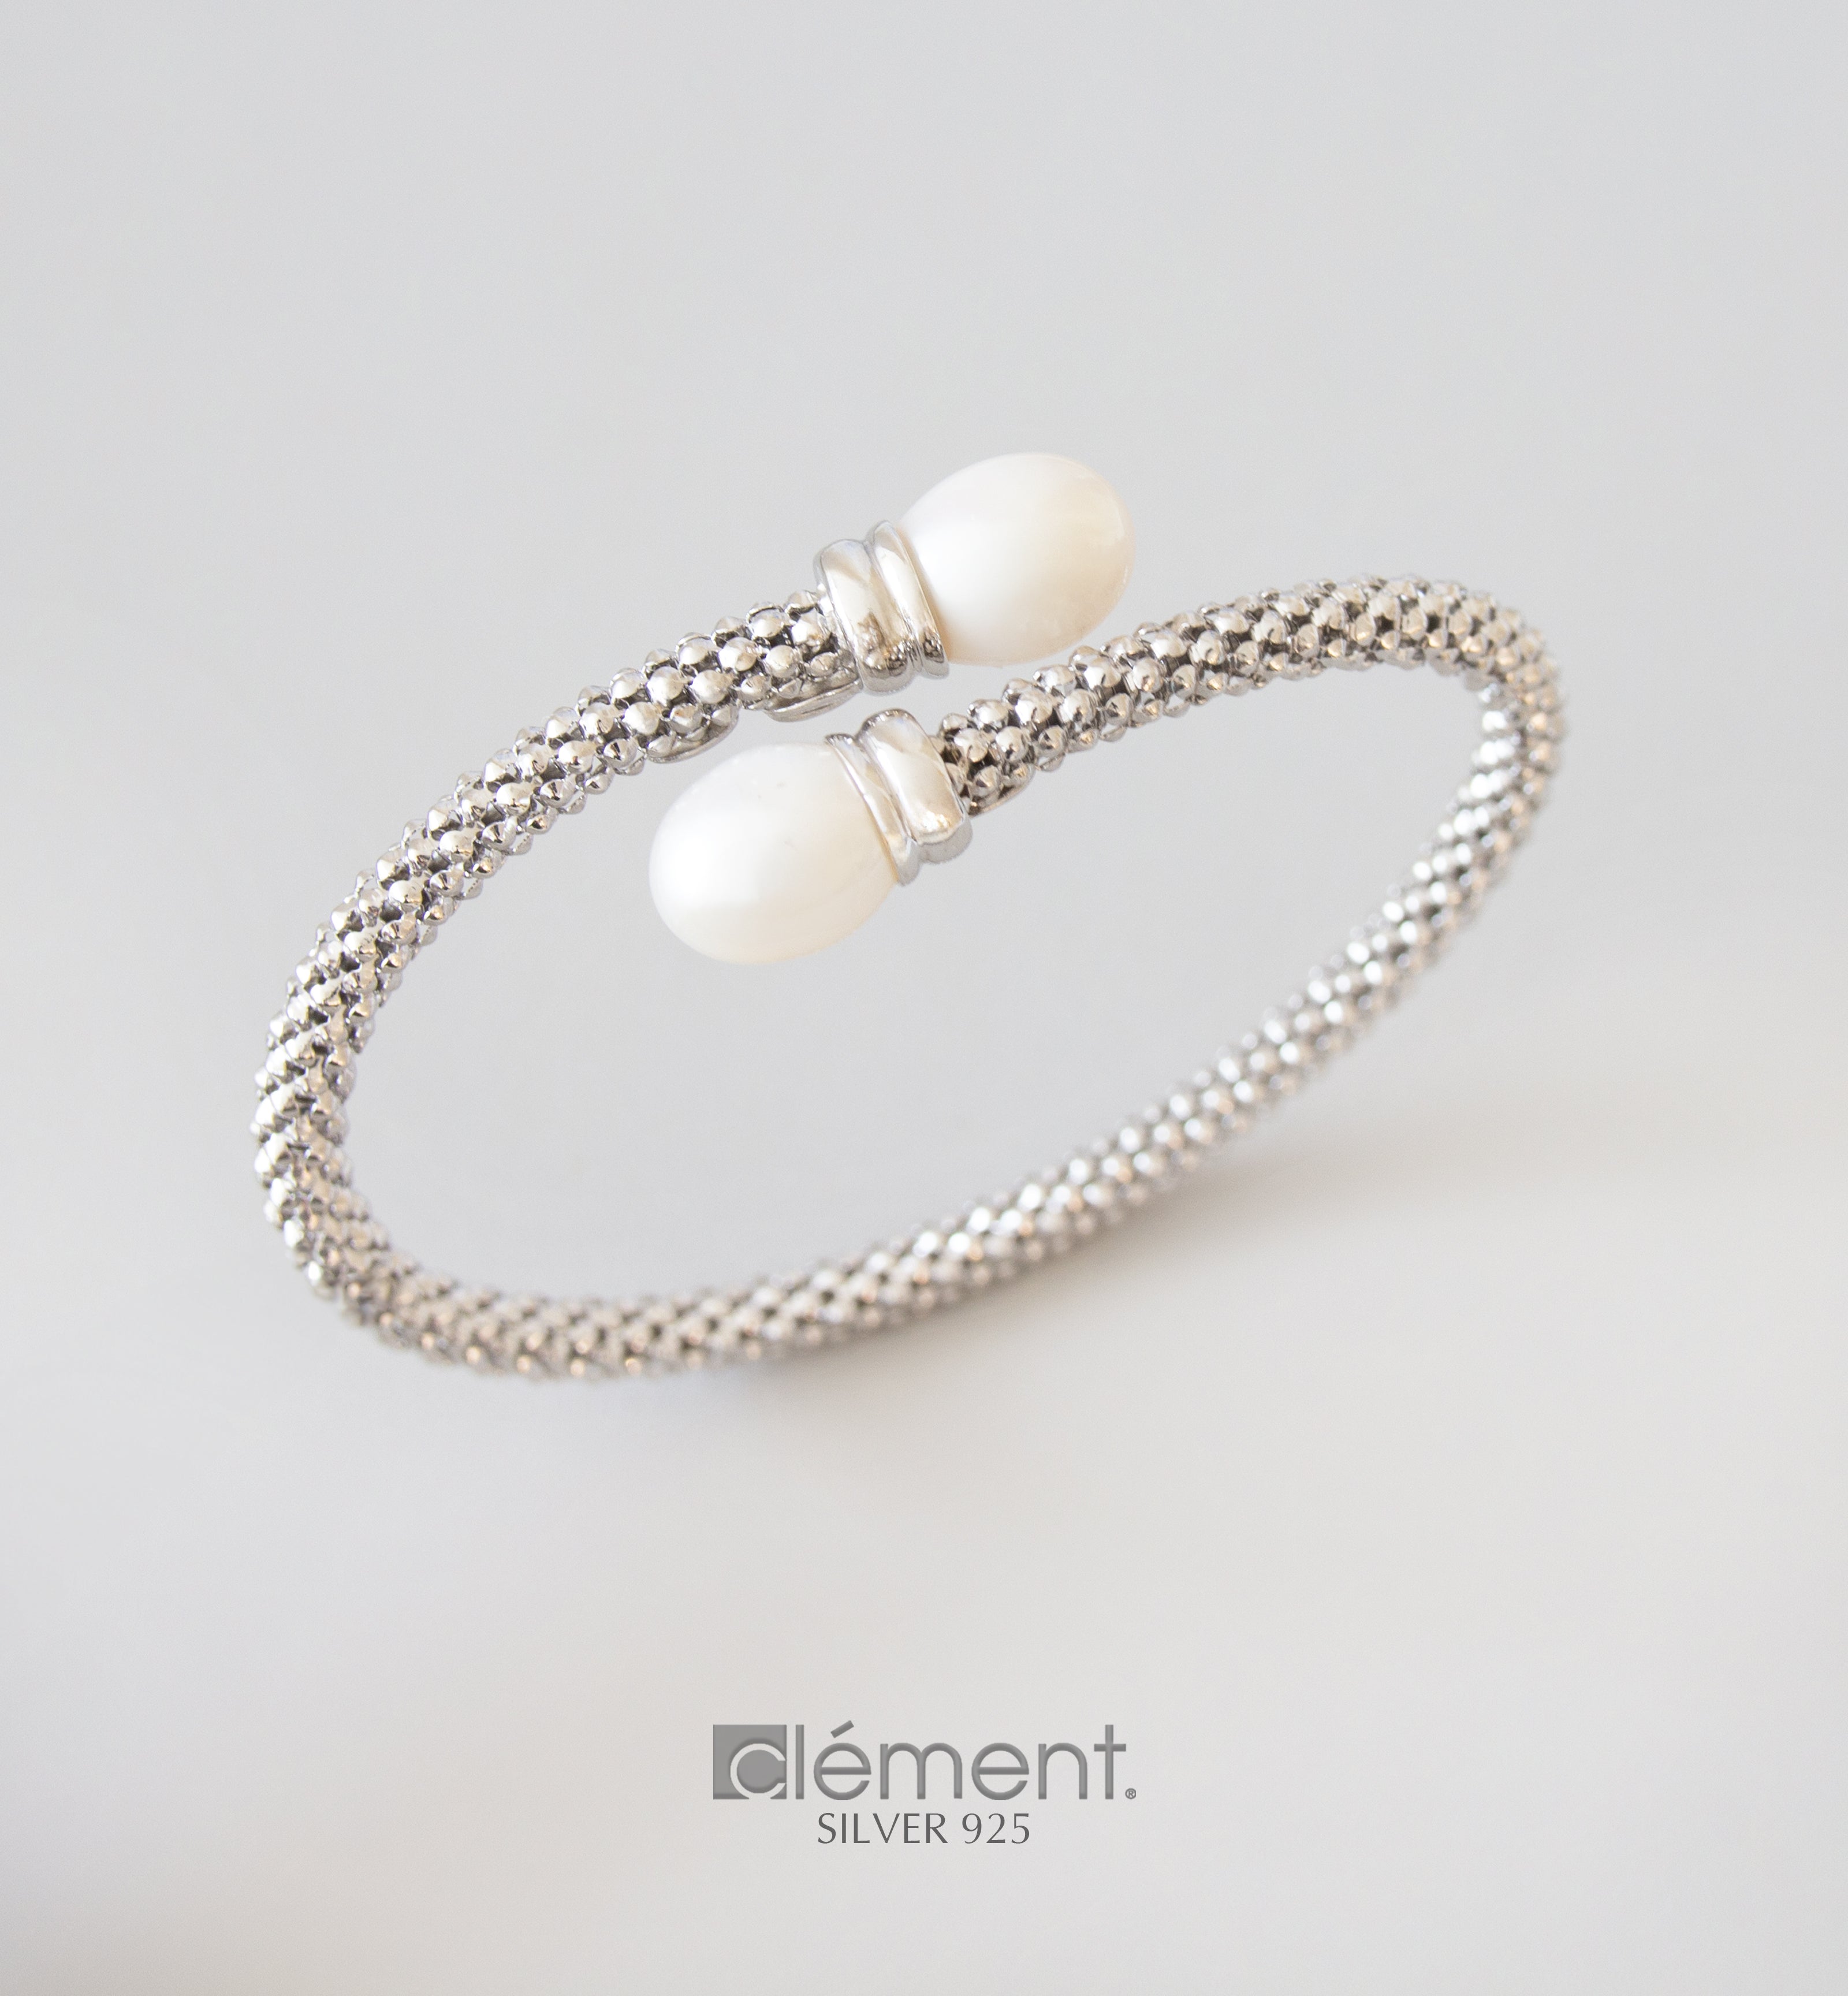 Silver 925 Design Bangle with Pearls